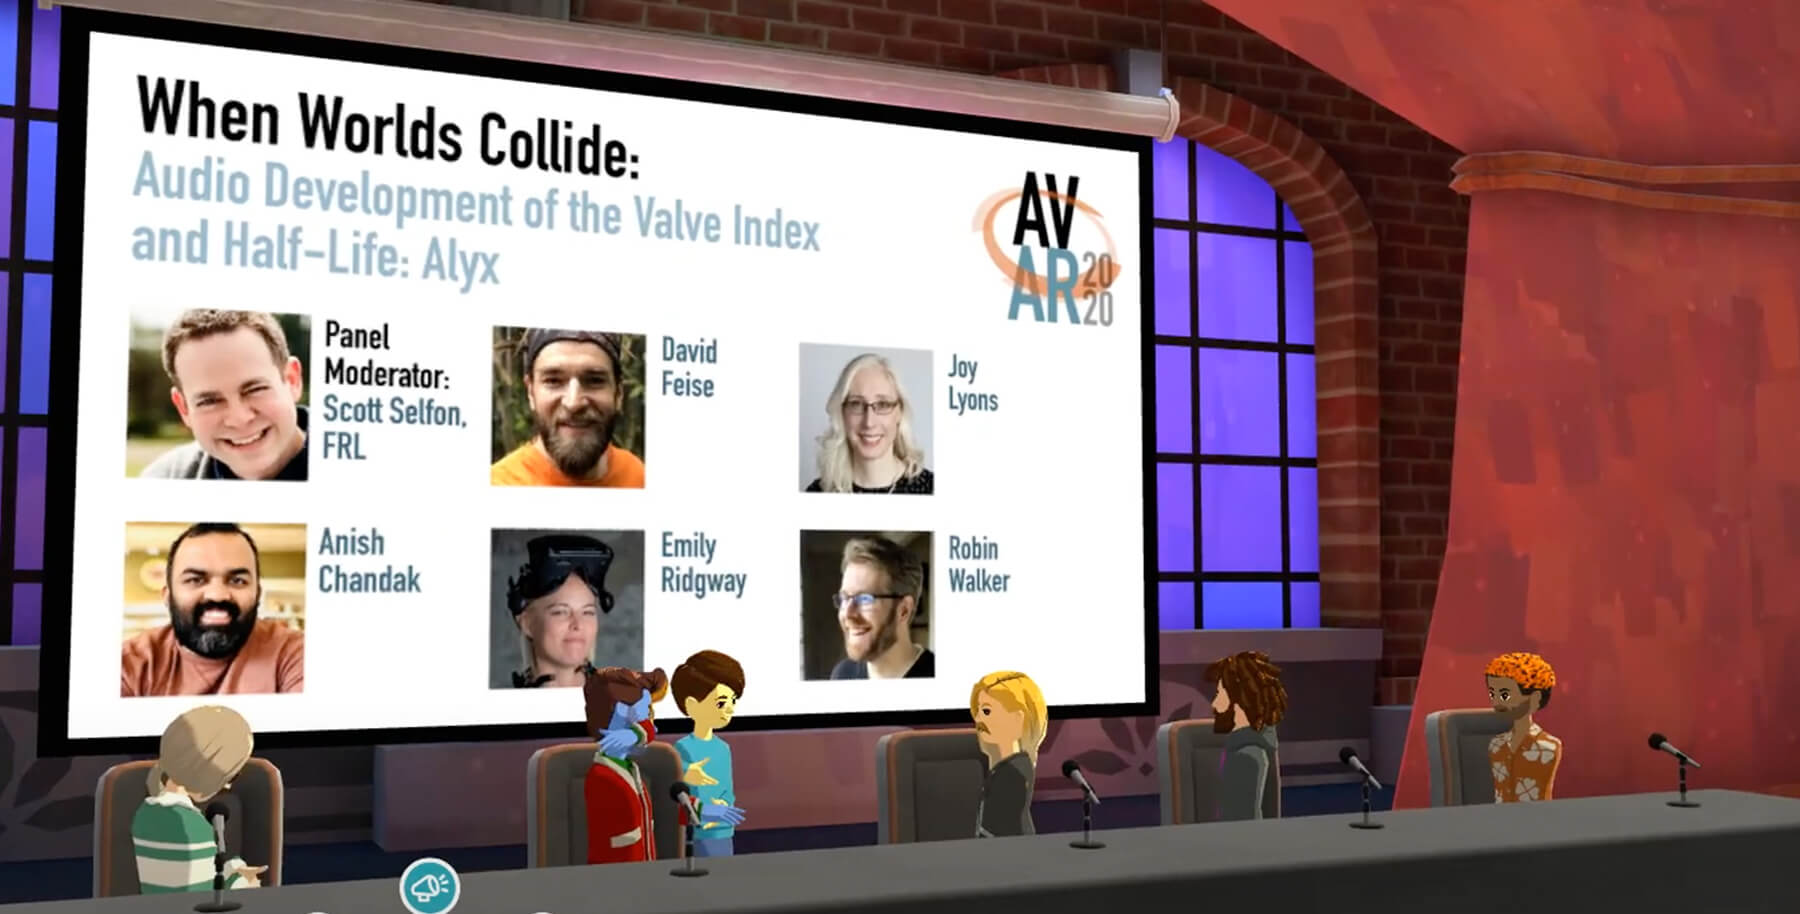 A group of Valve audio developers' virtual reality avatars sit at a long panel discussion table in front of a presentation screen. 